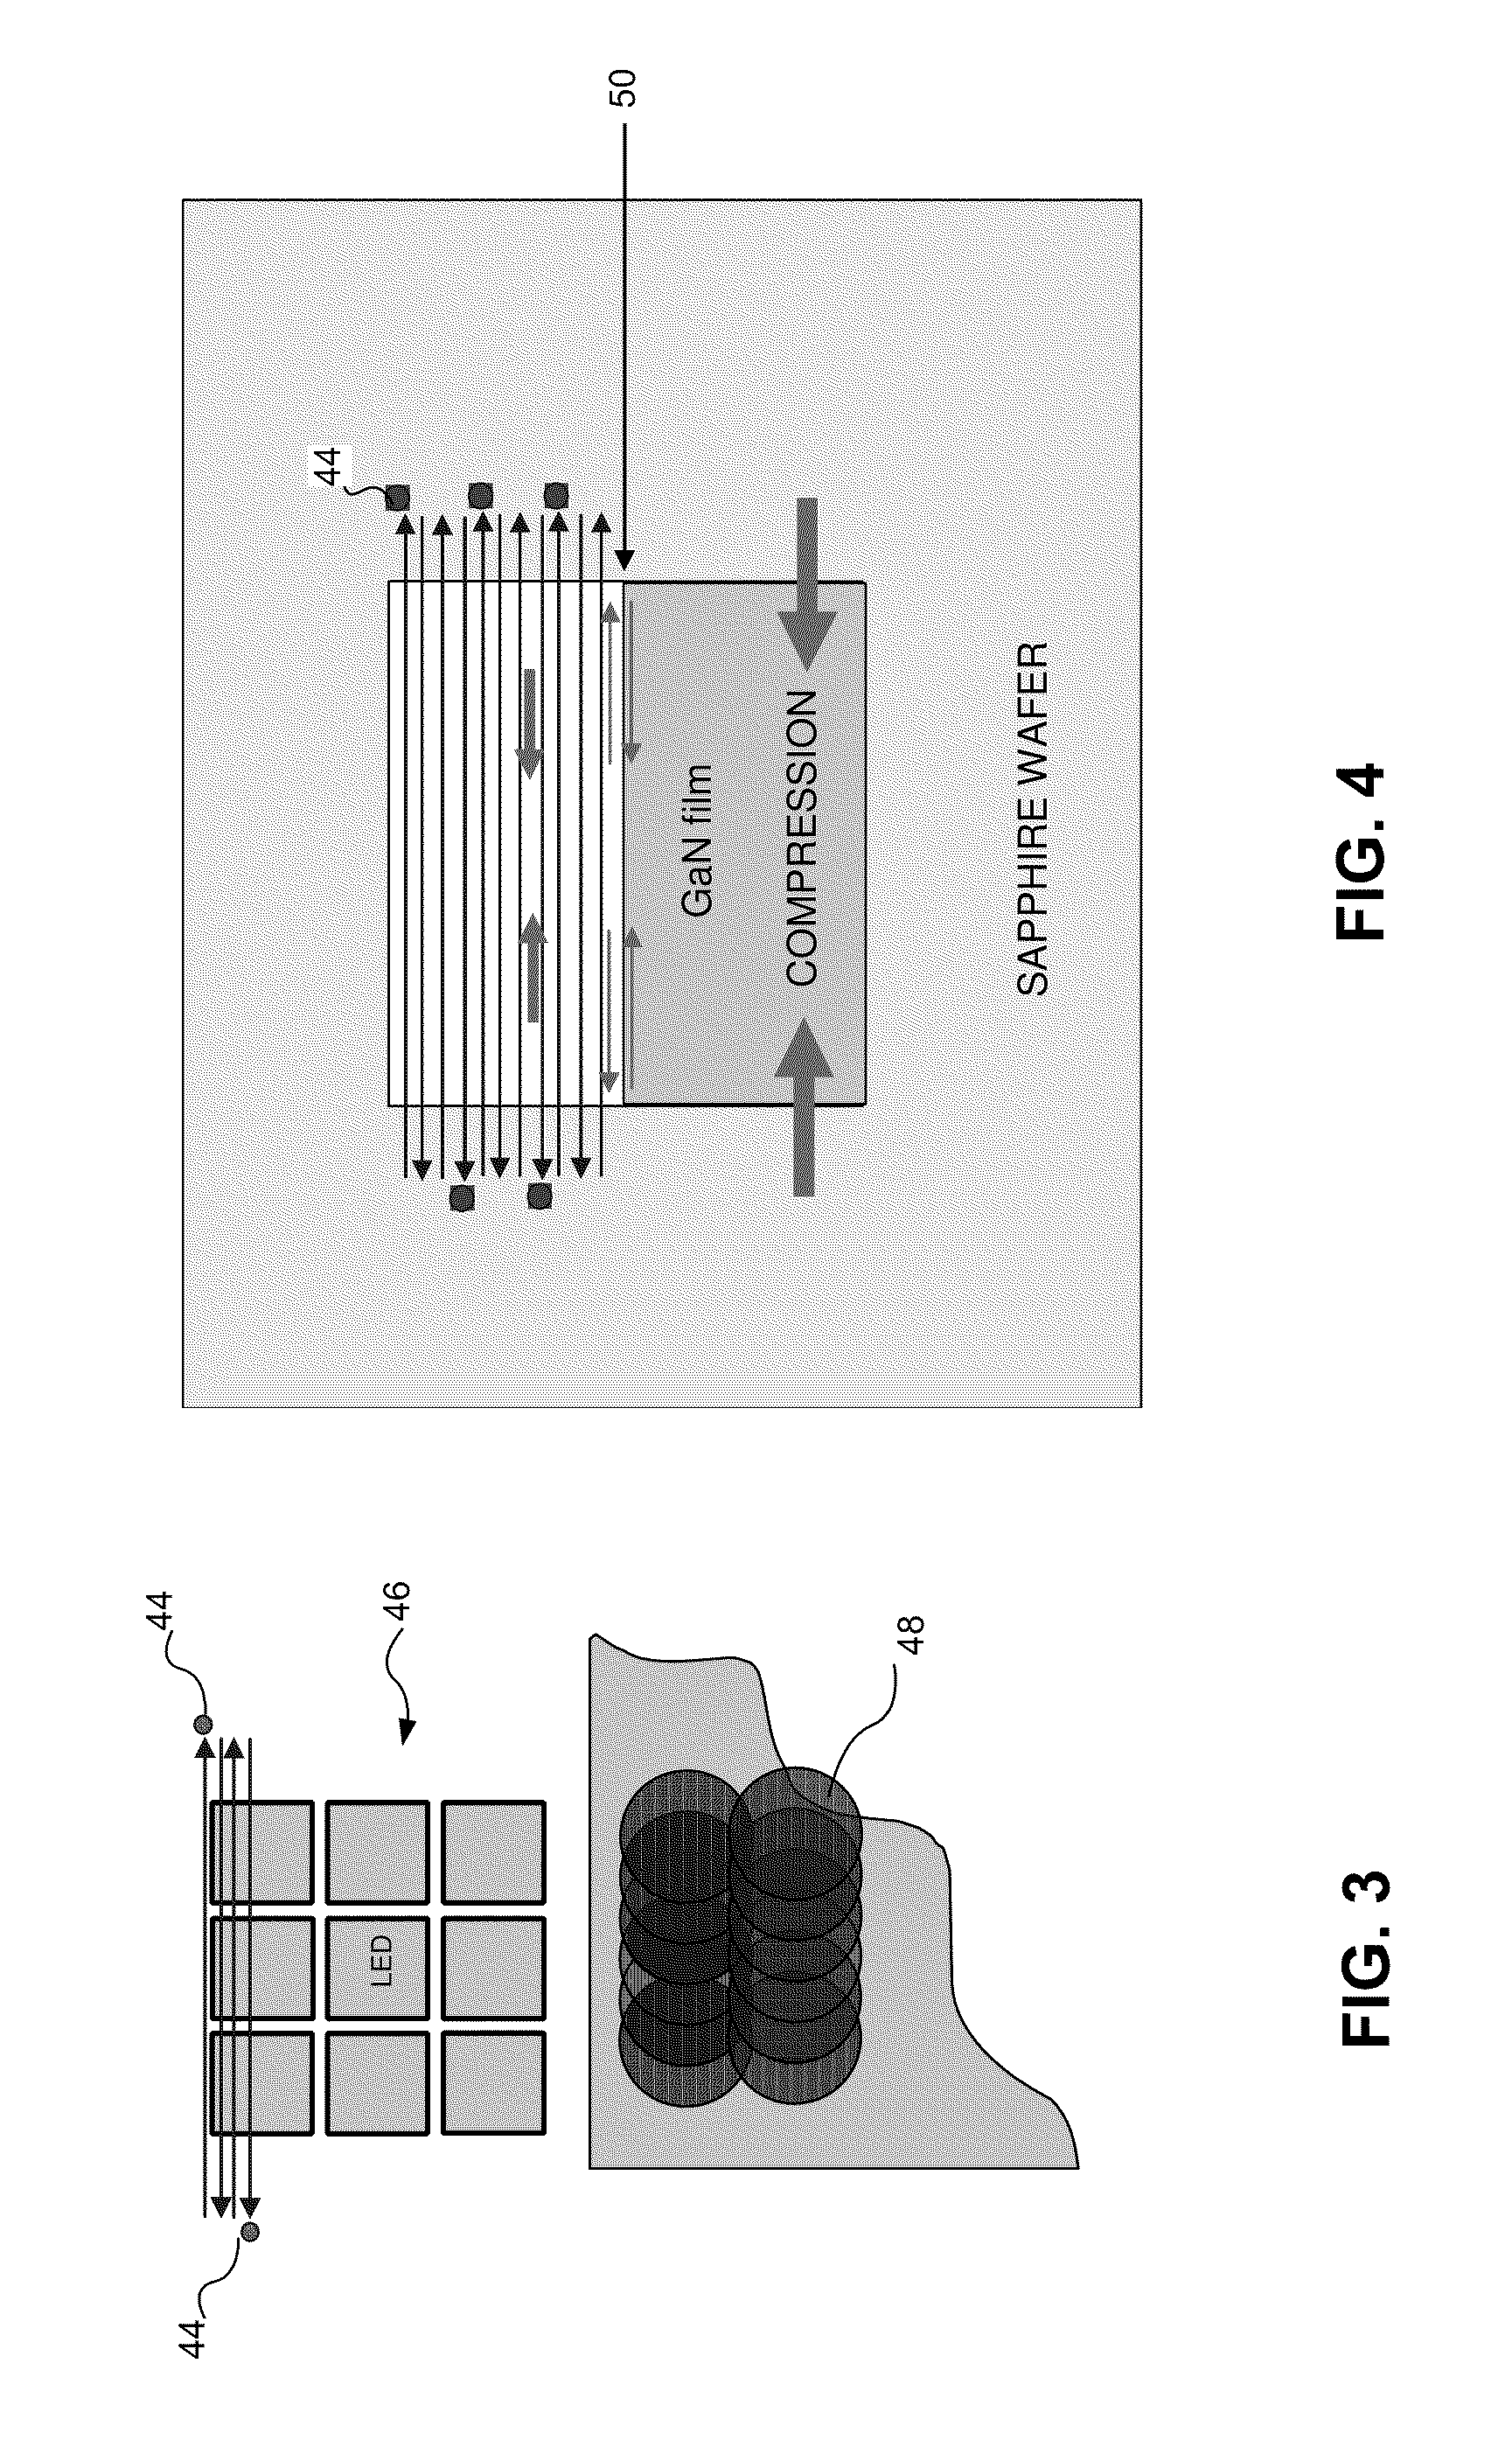 Laser lift off systems and methods